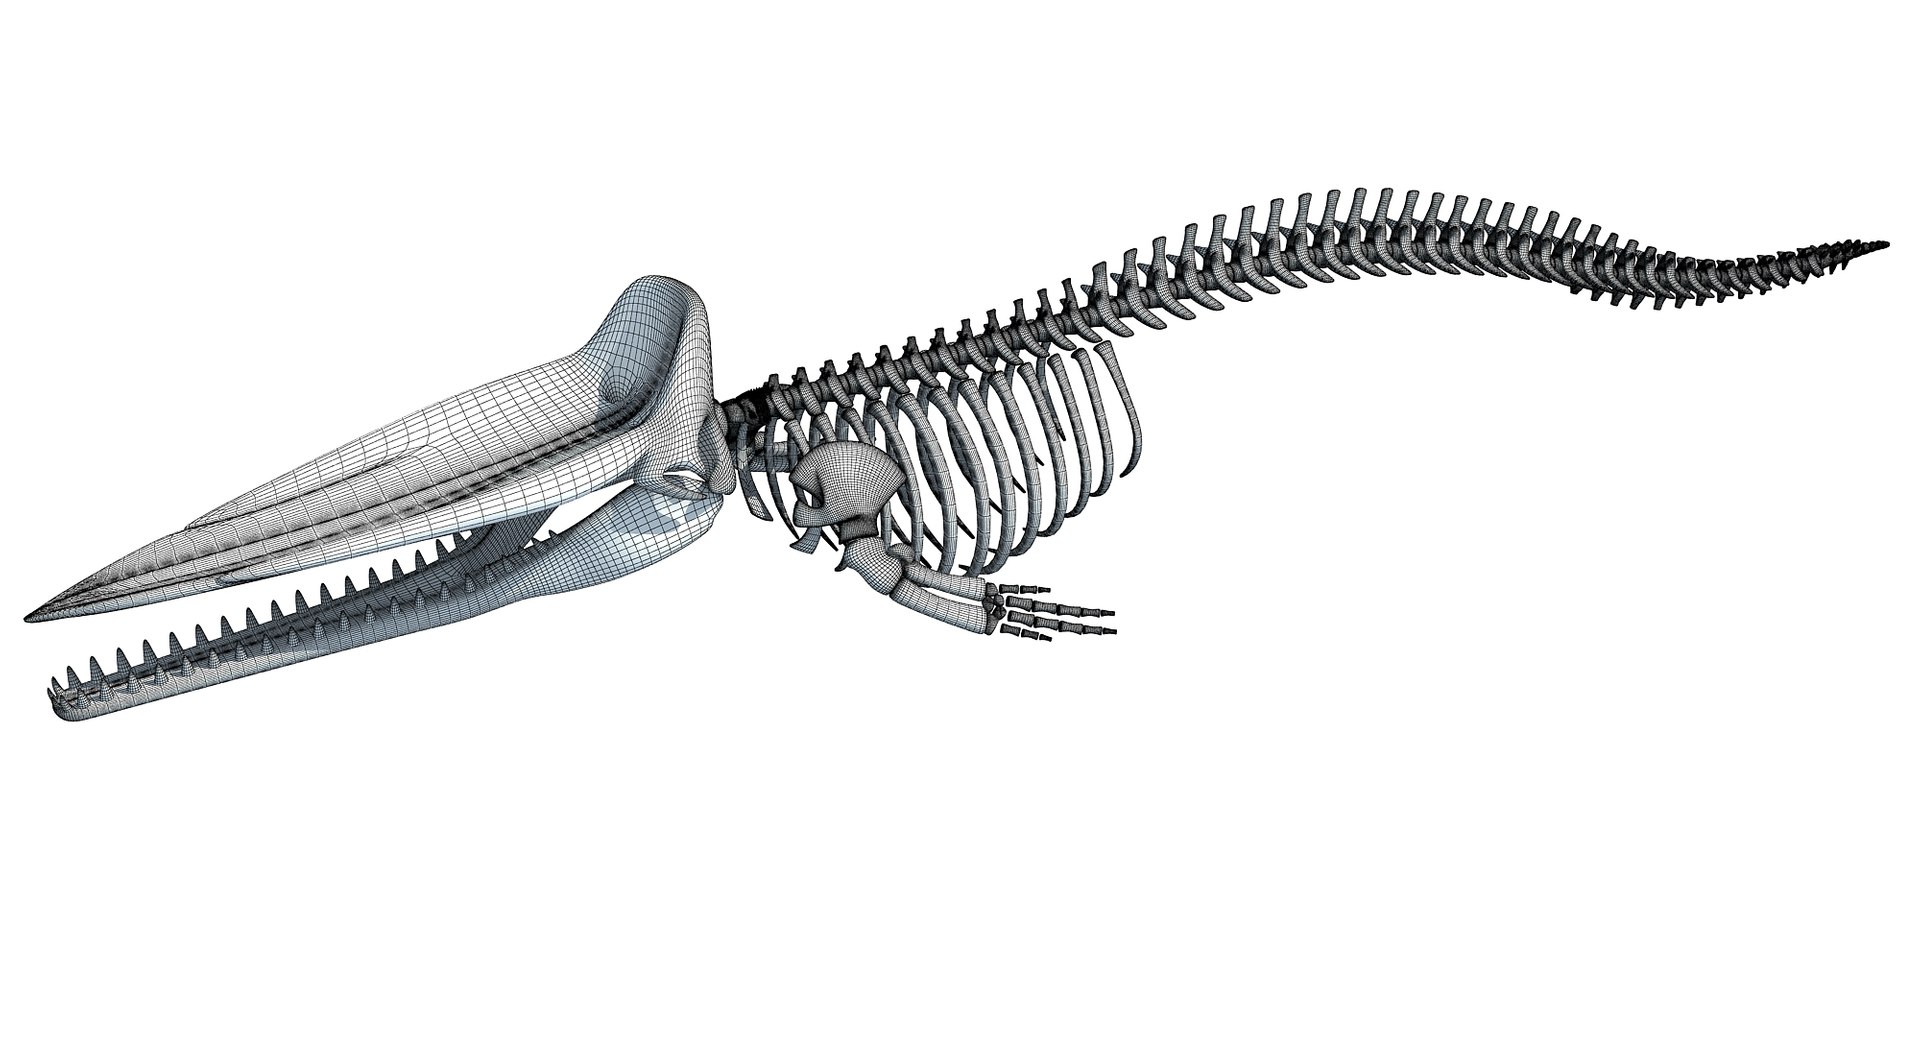 3,517 Whale Skeleton Images, Stock Photos, 3D objects, & Vectors